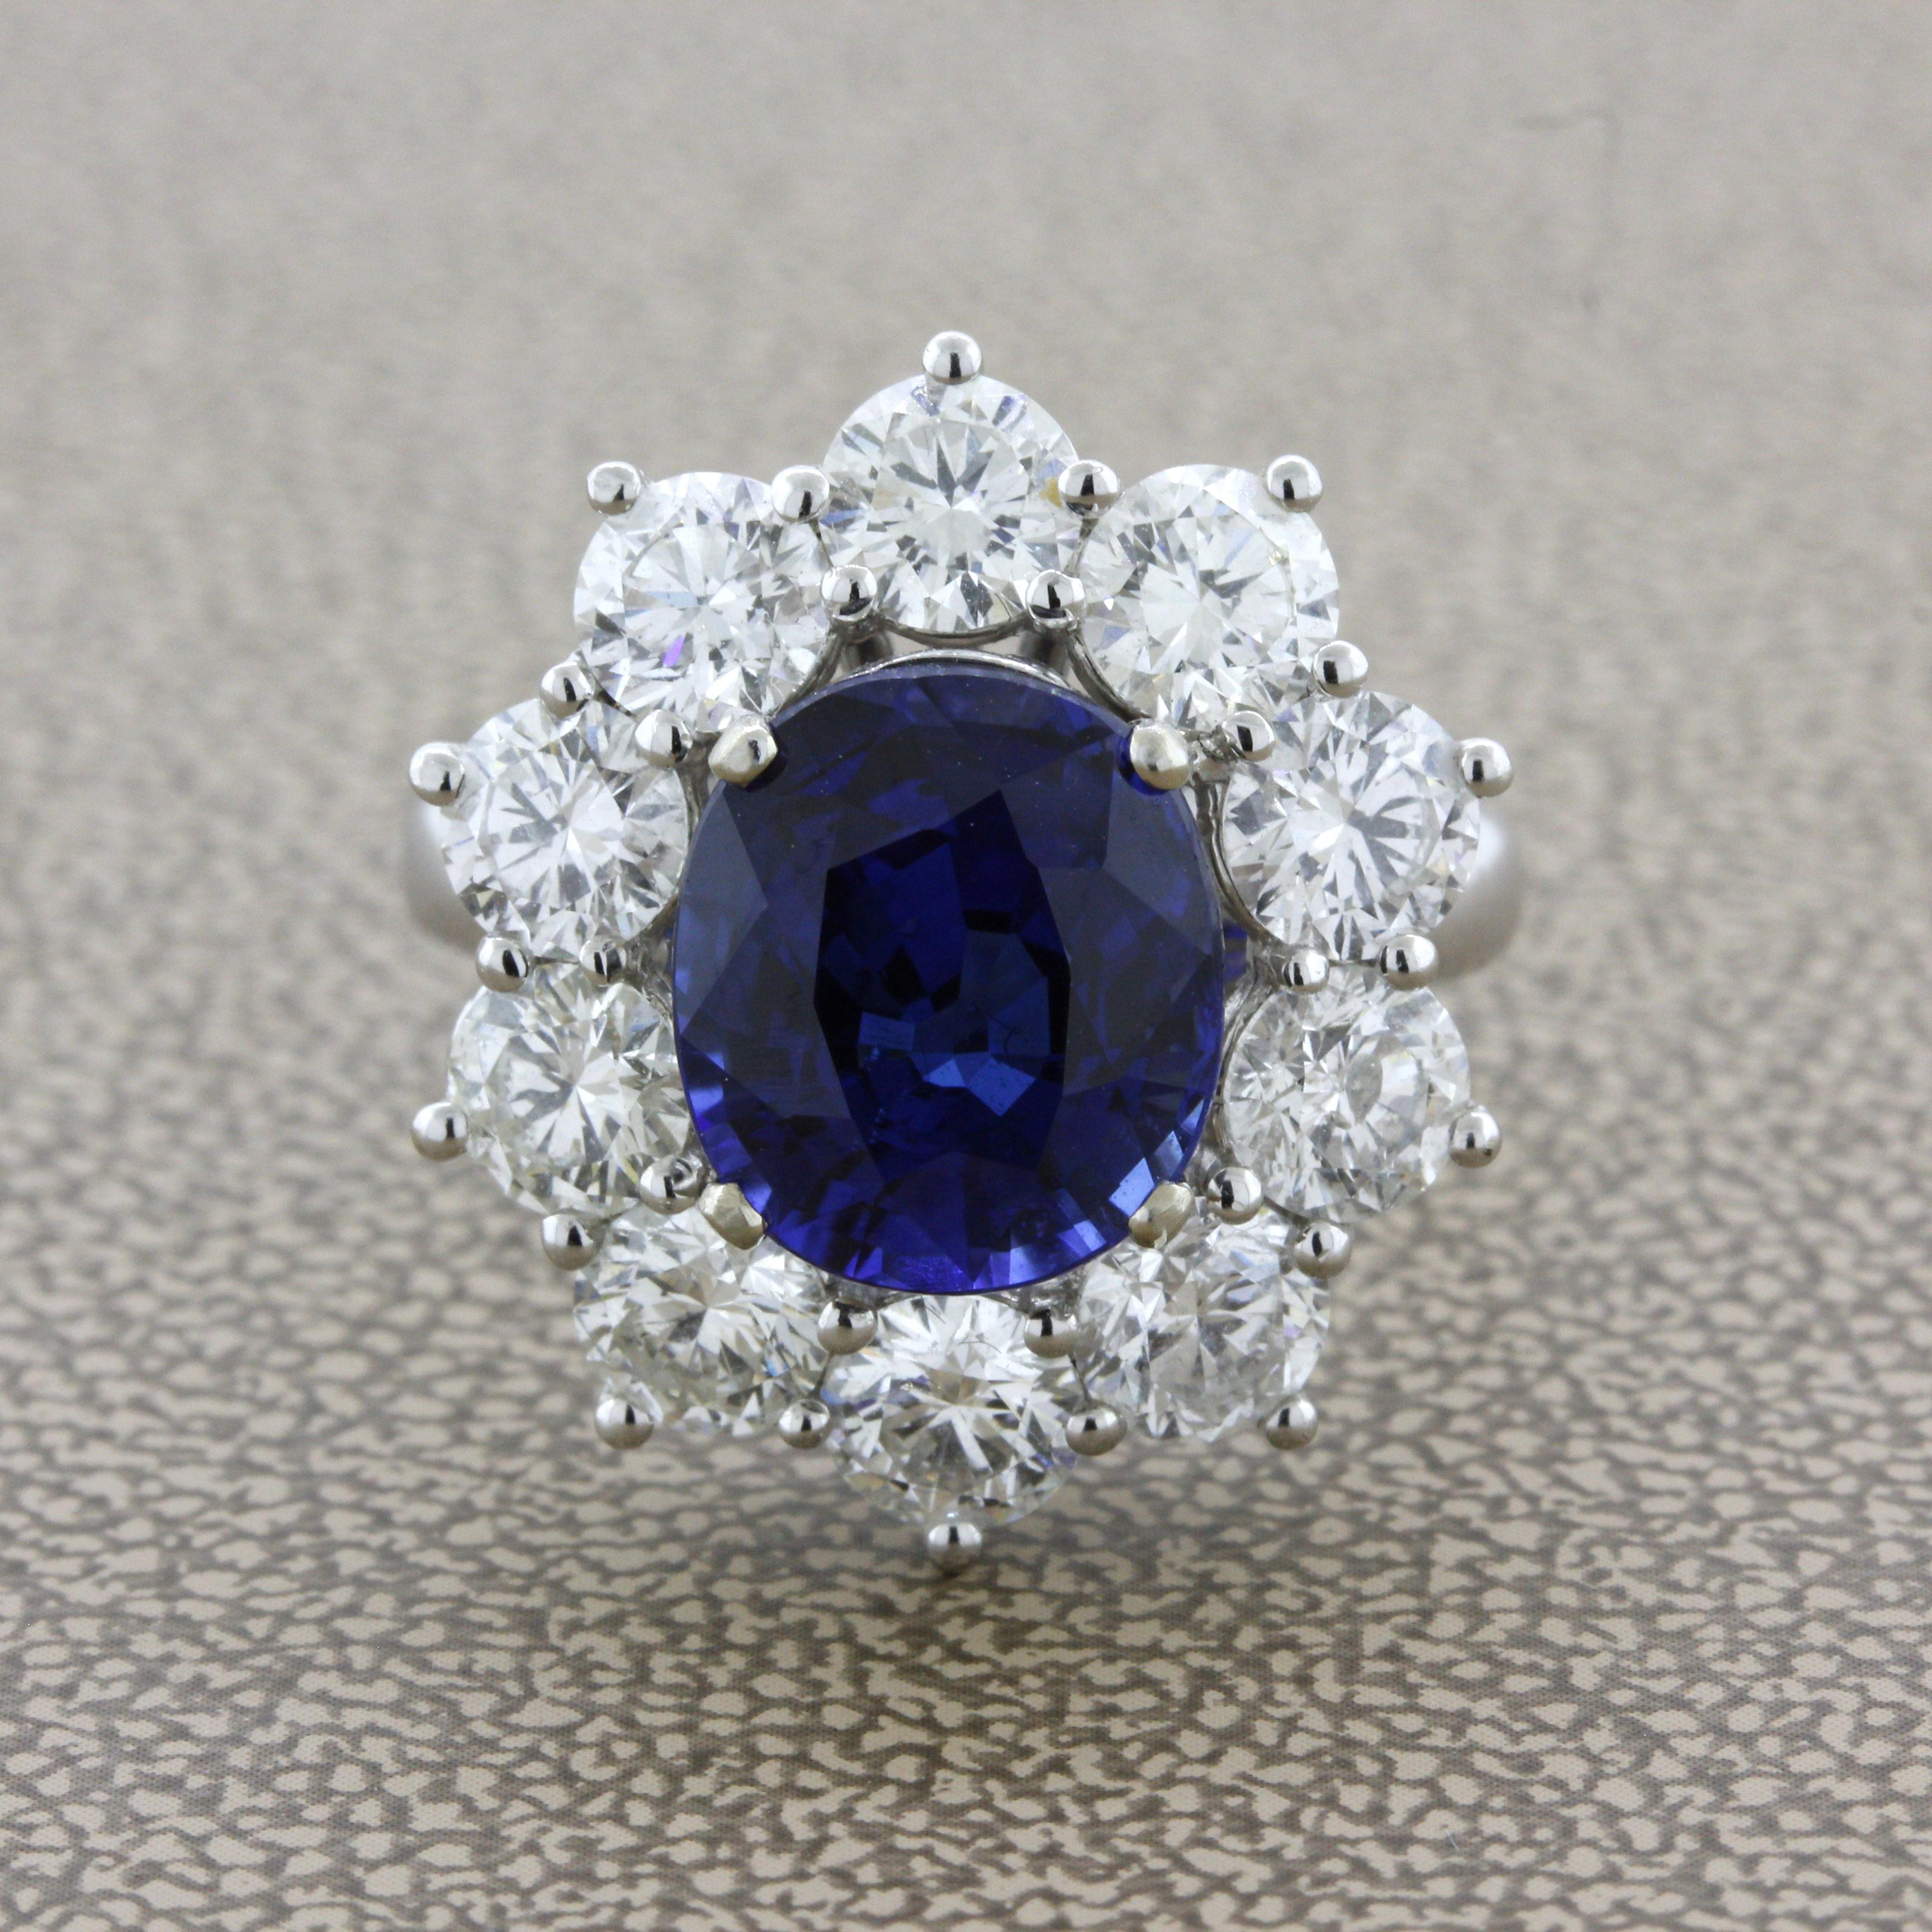 Here we have a rich beautiful blue sapphire set in the middle of this Princess Diana style diamond engagement ring. It weighs 5.18 carats with a rich vibrant blue color along with a lovely oval shape. Adding to that the sapphire is GIA certified and